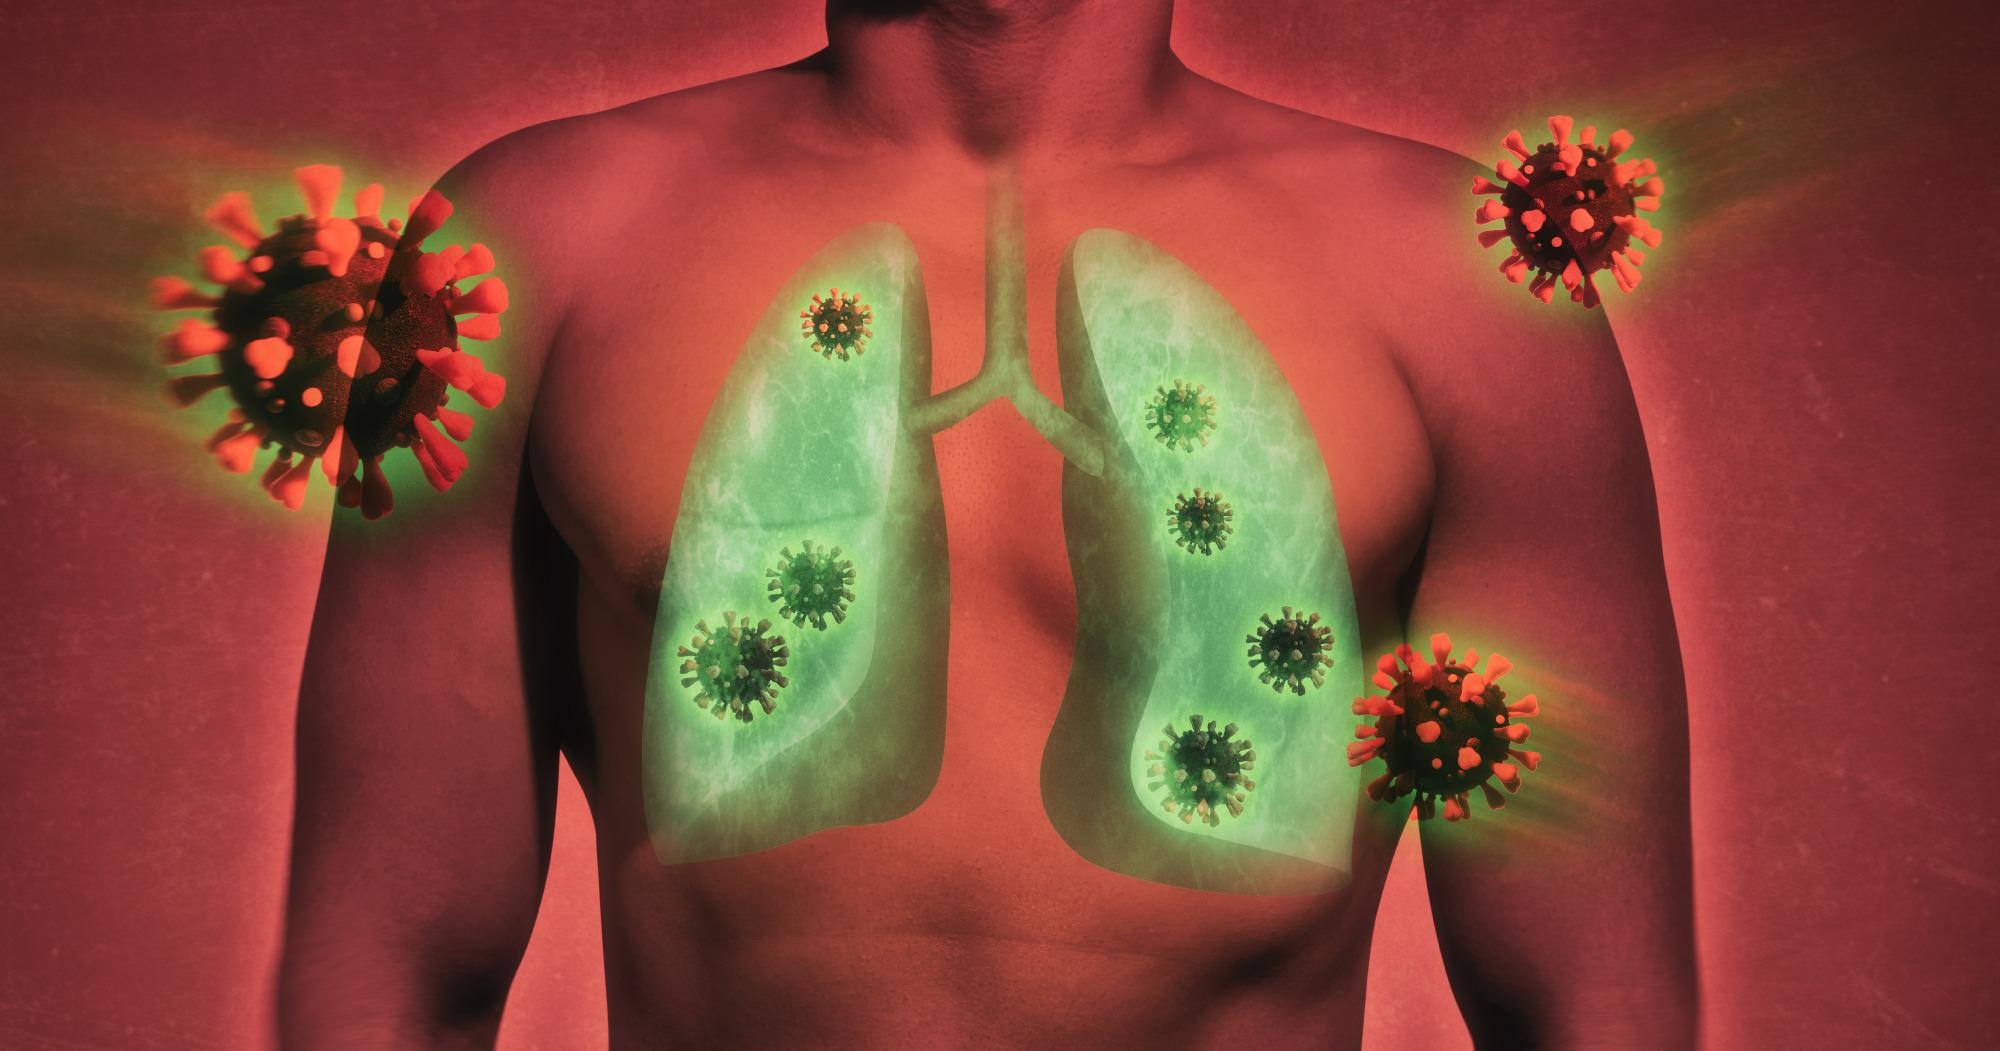 Study: One-year pulmonary impairment after severe COVID-19: a prospective, multicenter follow-up study. Image Credit: SvetaZi / Shutterstock